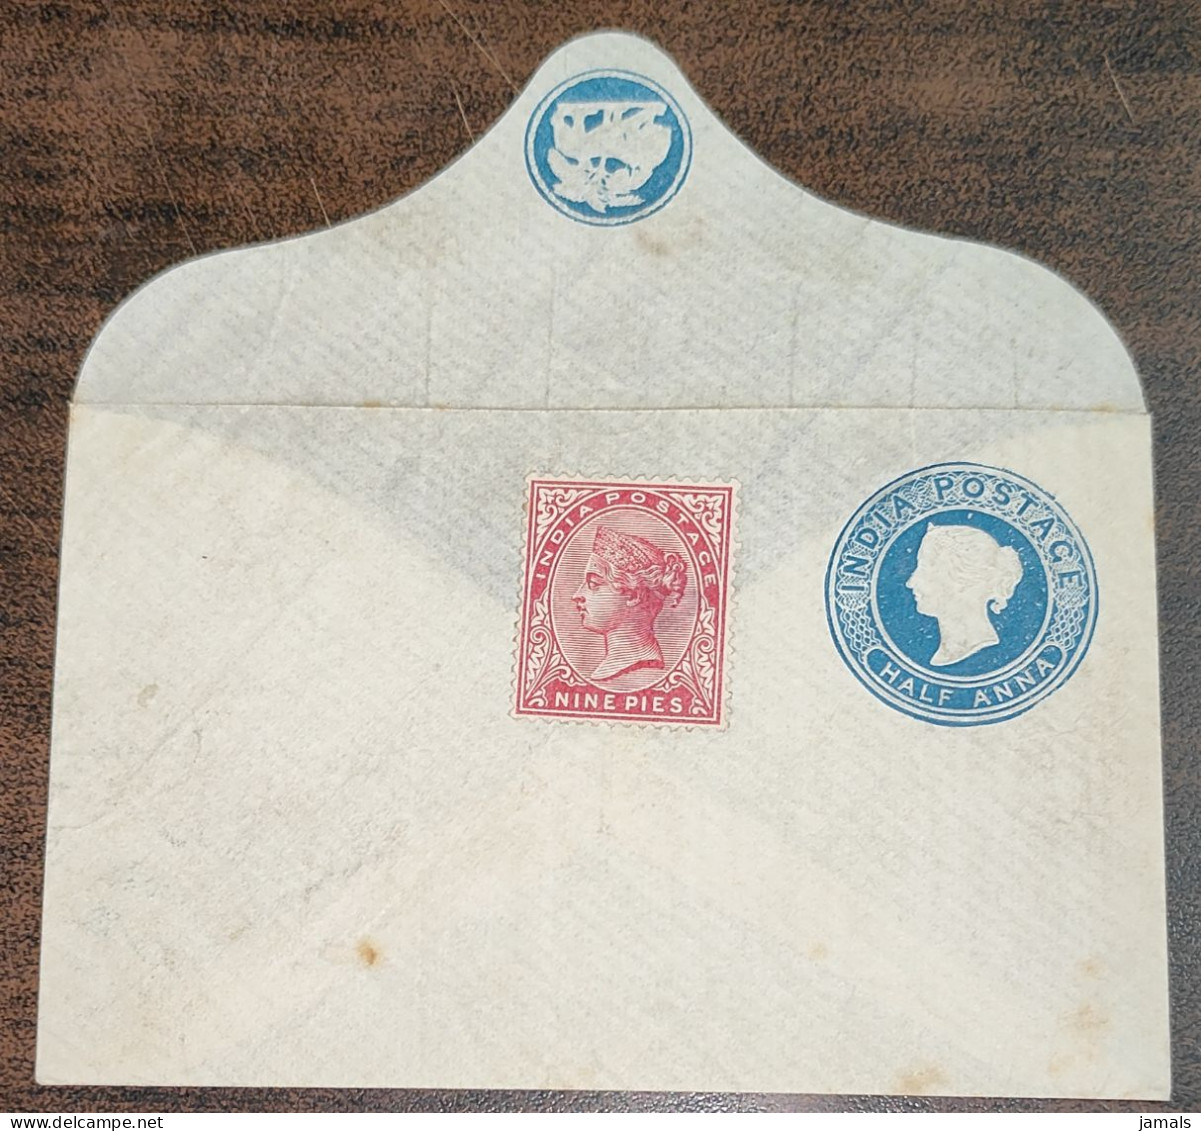 Br India Queen Victoria Postal Stationary Envelope Laid Thin Paper Mint Condition As Per The Scan - 1858-79 Kronenkolonie